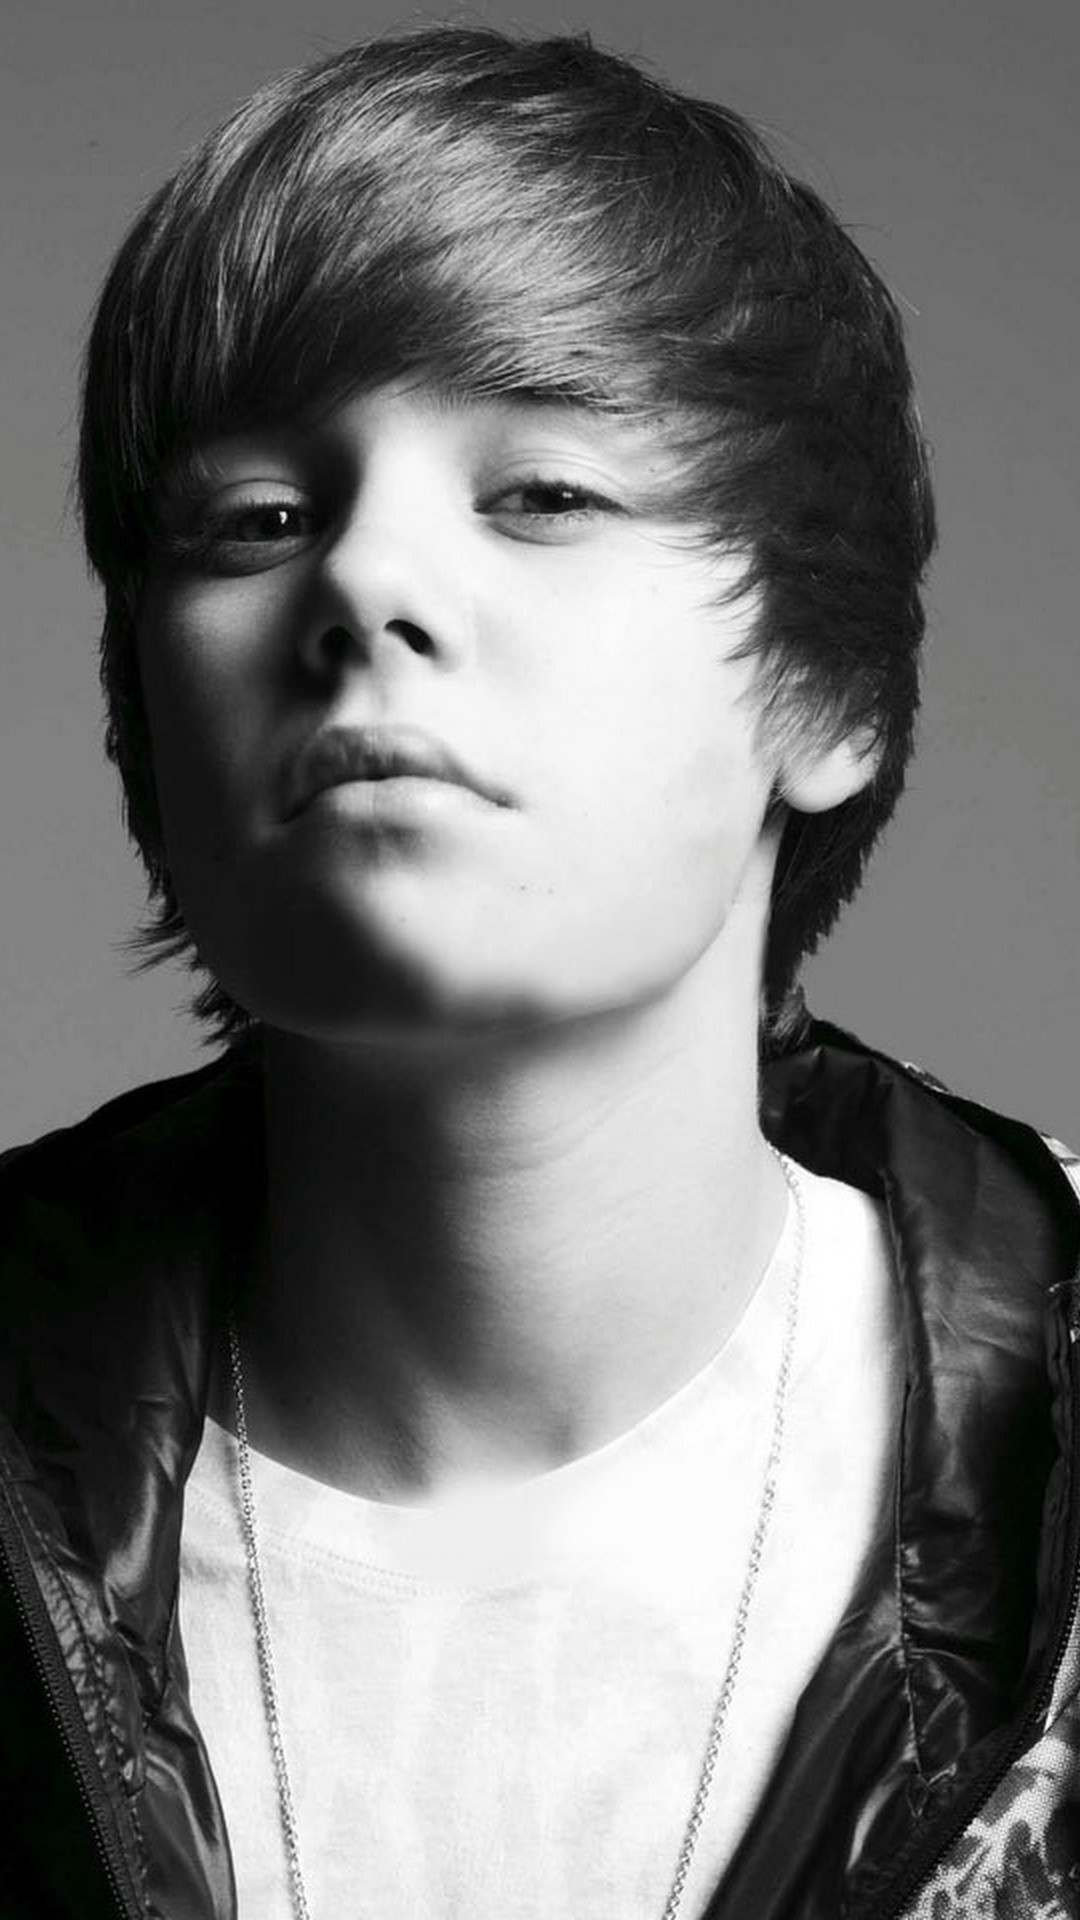 justin bieber wallpaper iphone,hair,face,hairstyle,chin,eyebrow